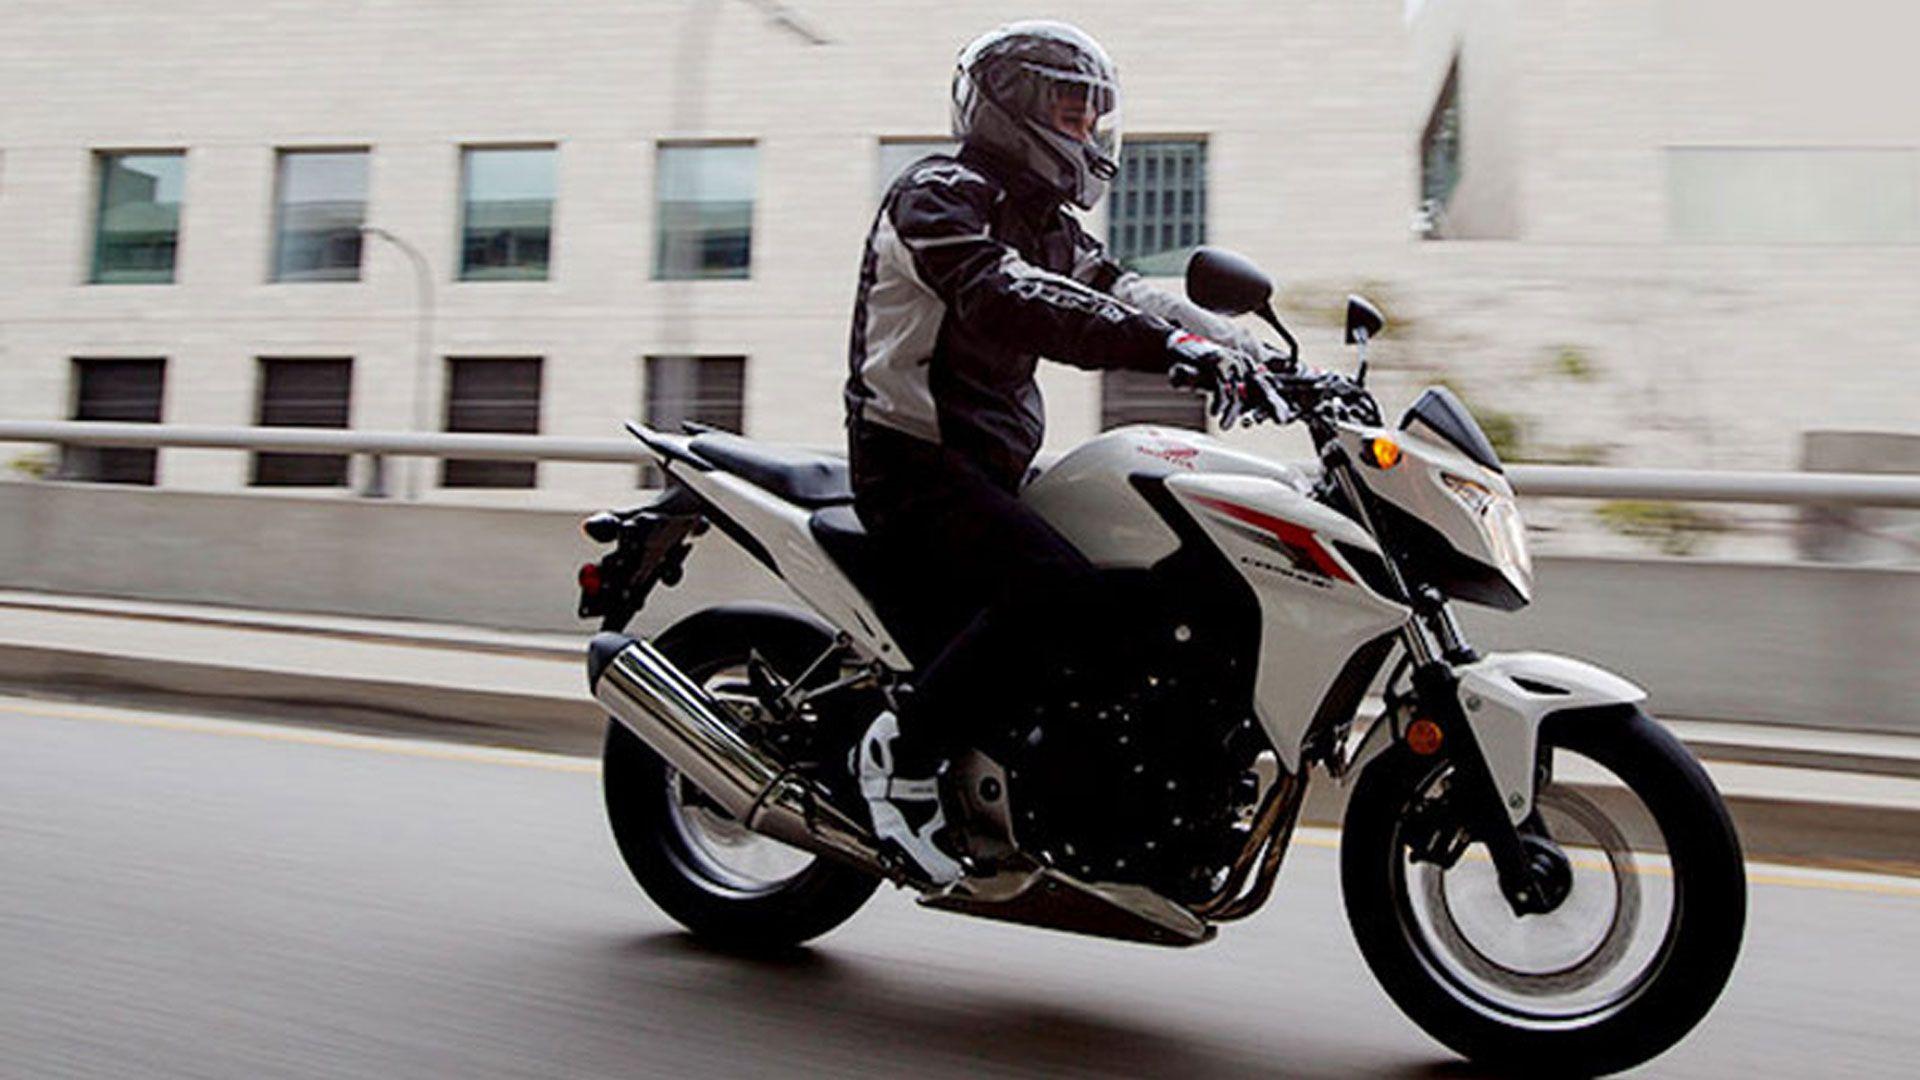 Honda CB500F ABS Full Review and Price